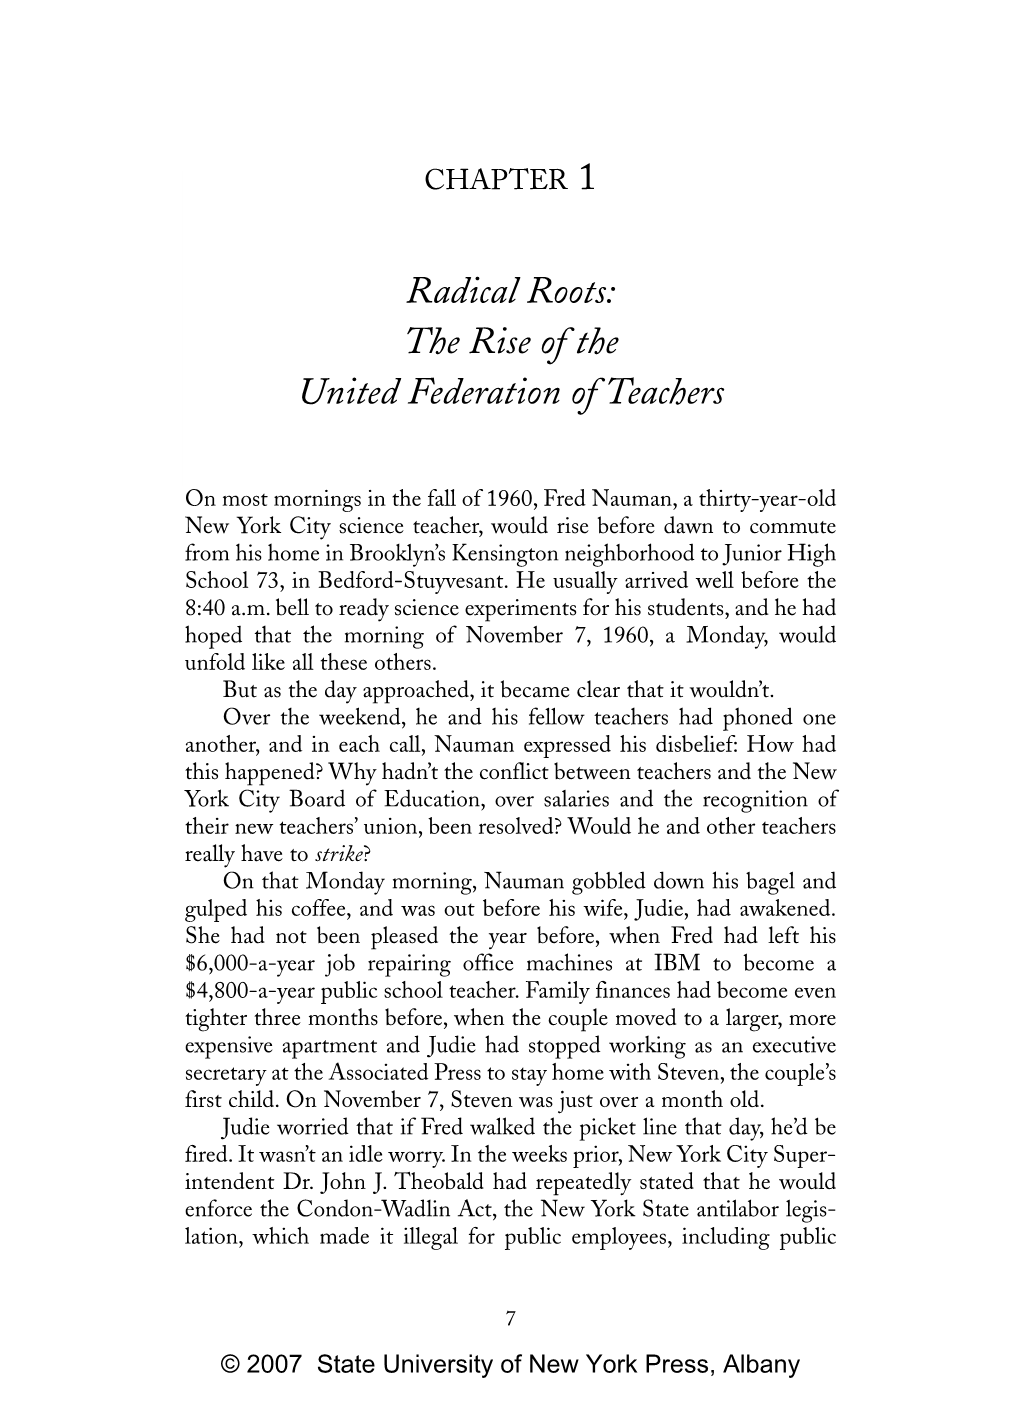 Radical Roots: the Rise of the United Federation of Teachers